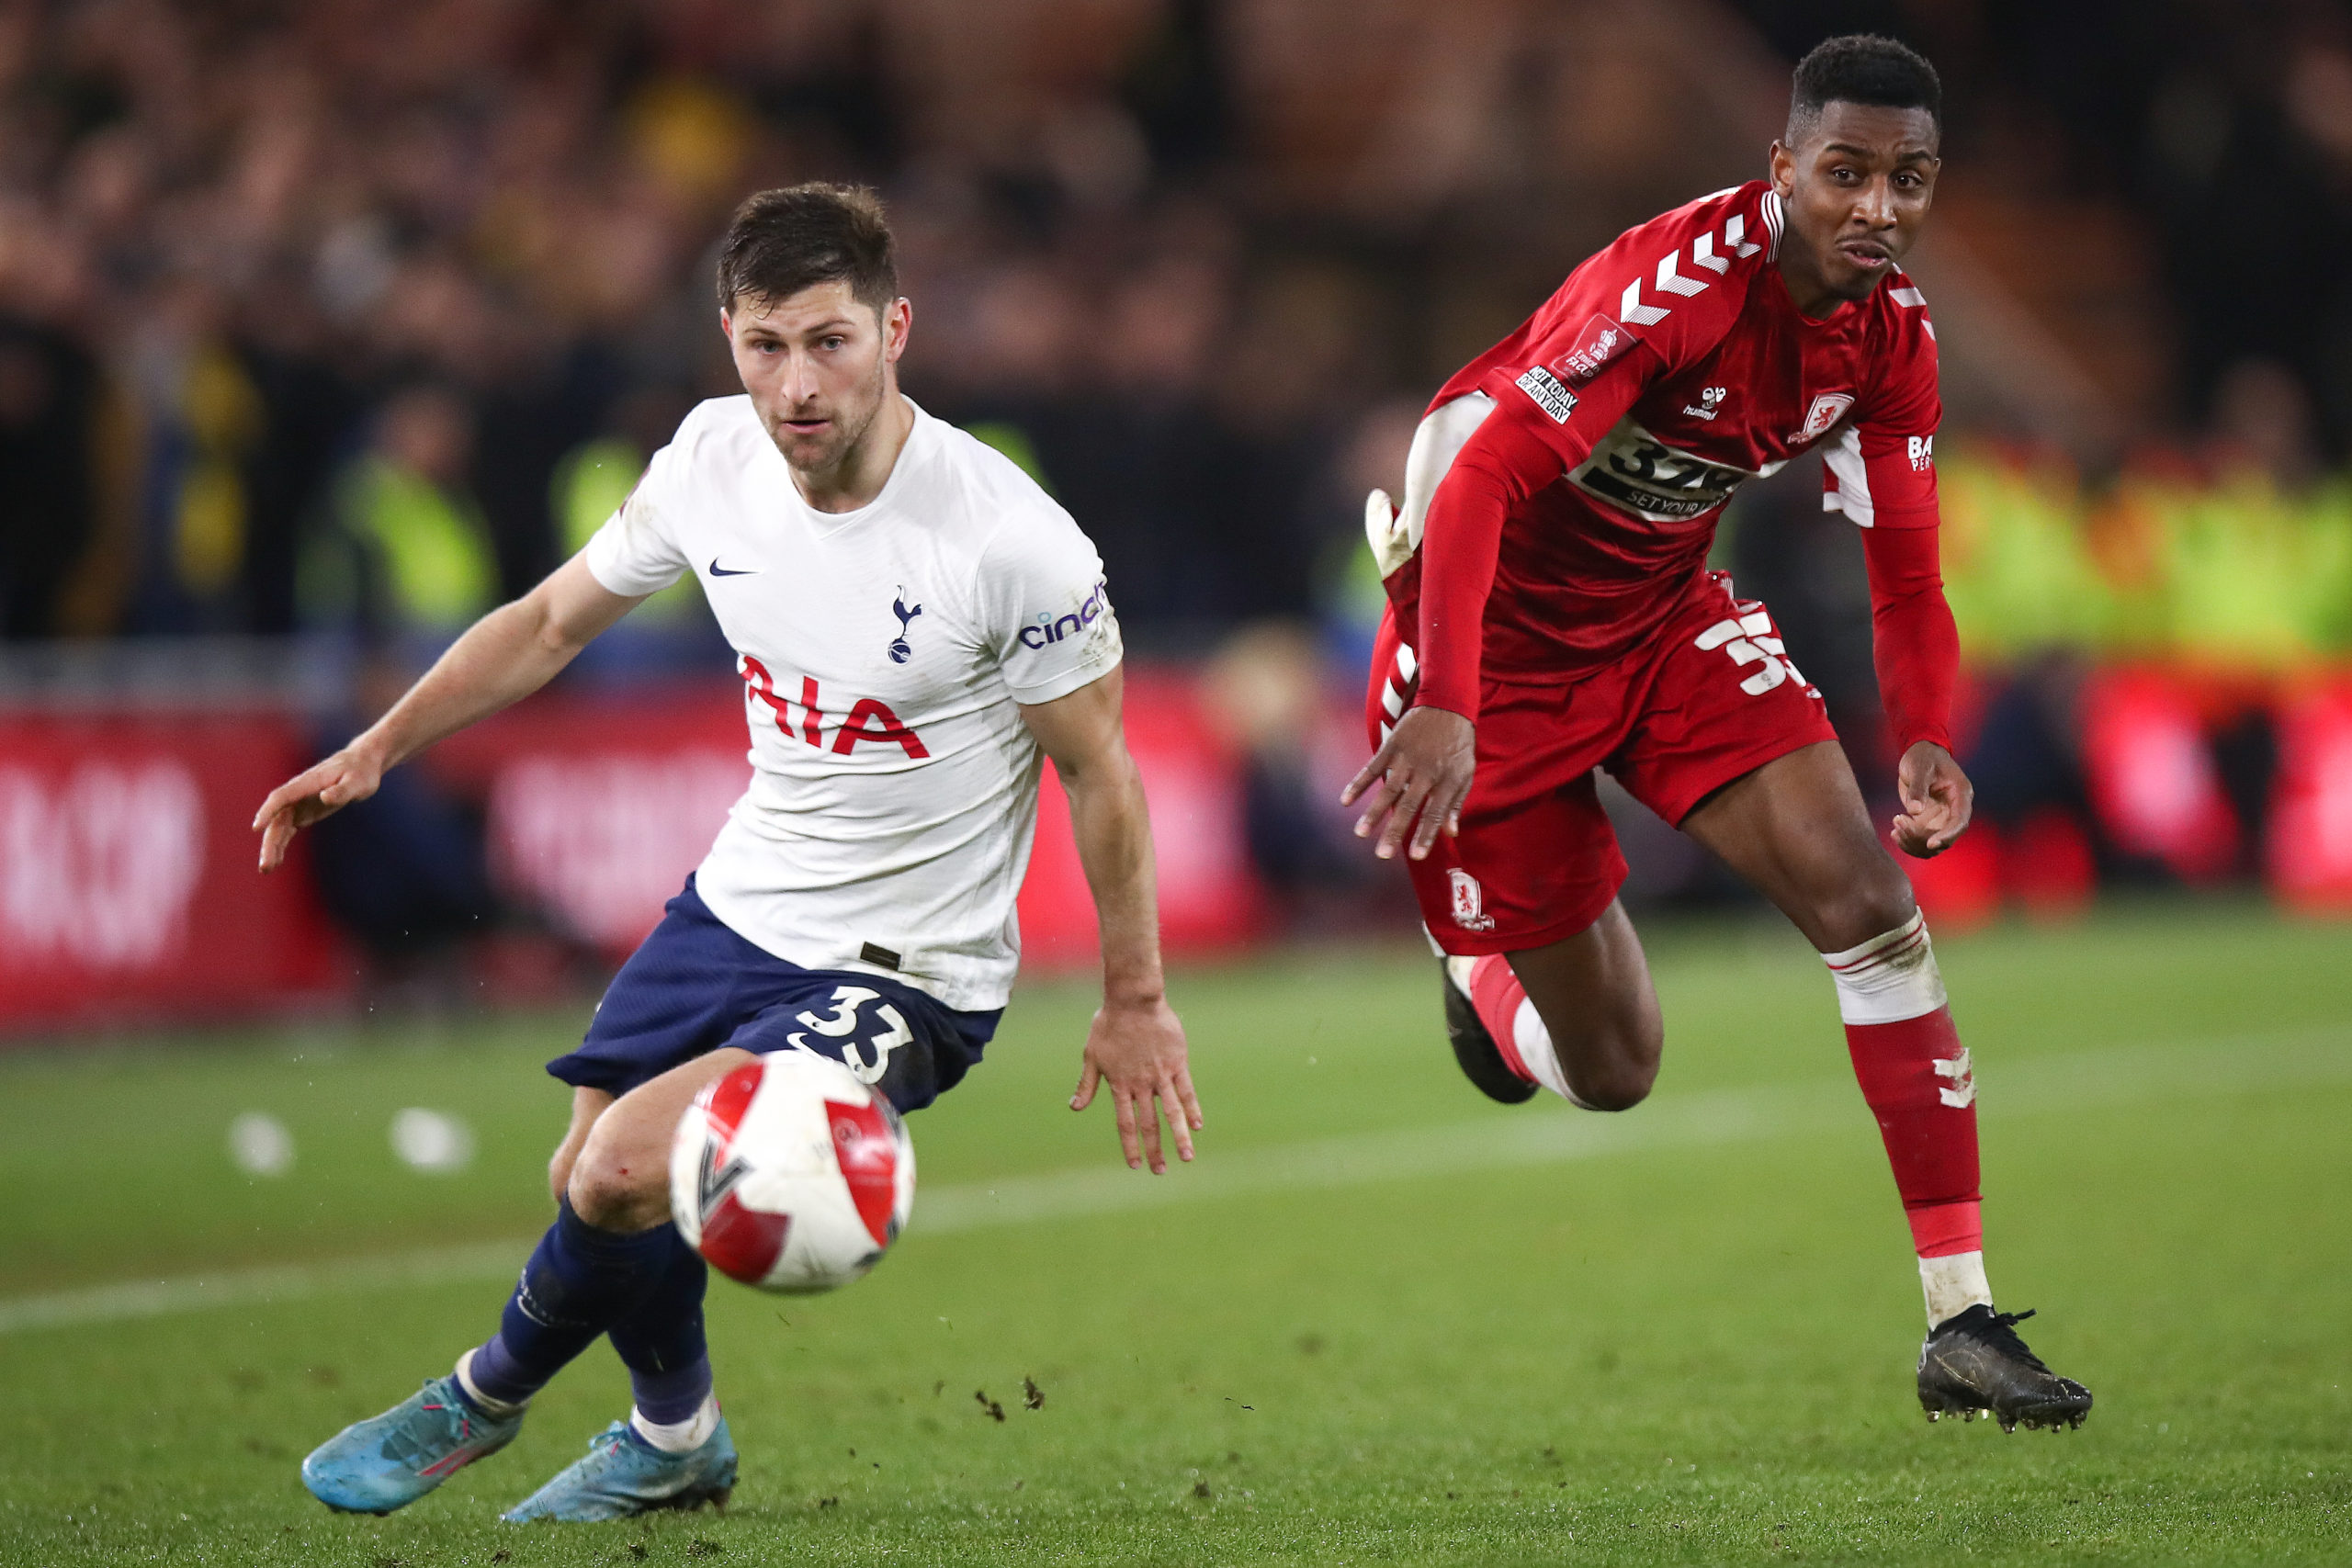 Middlesbrough v Tottenham Hotspur: The Emirates FA Cup Fifth Round